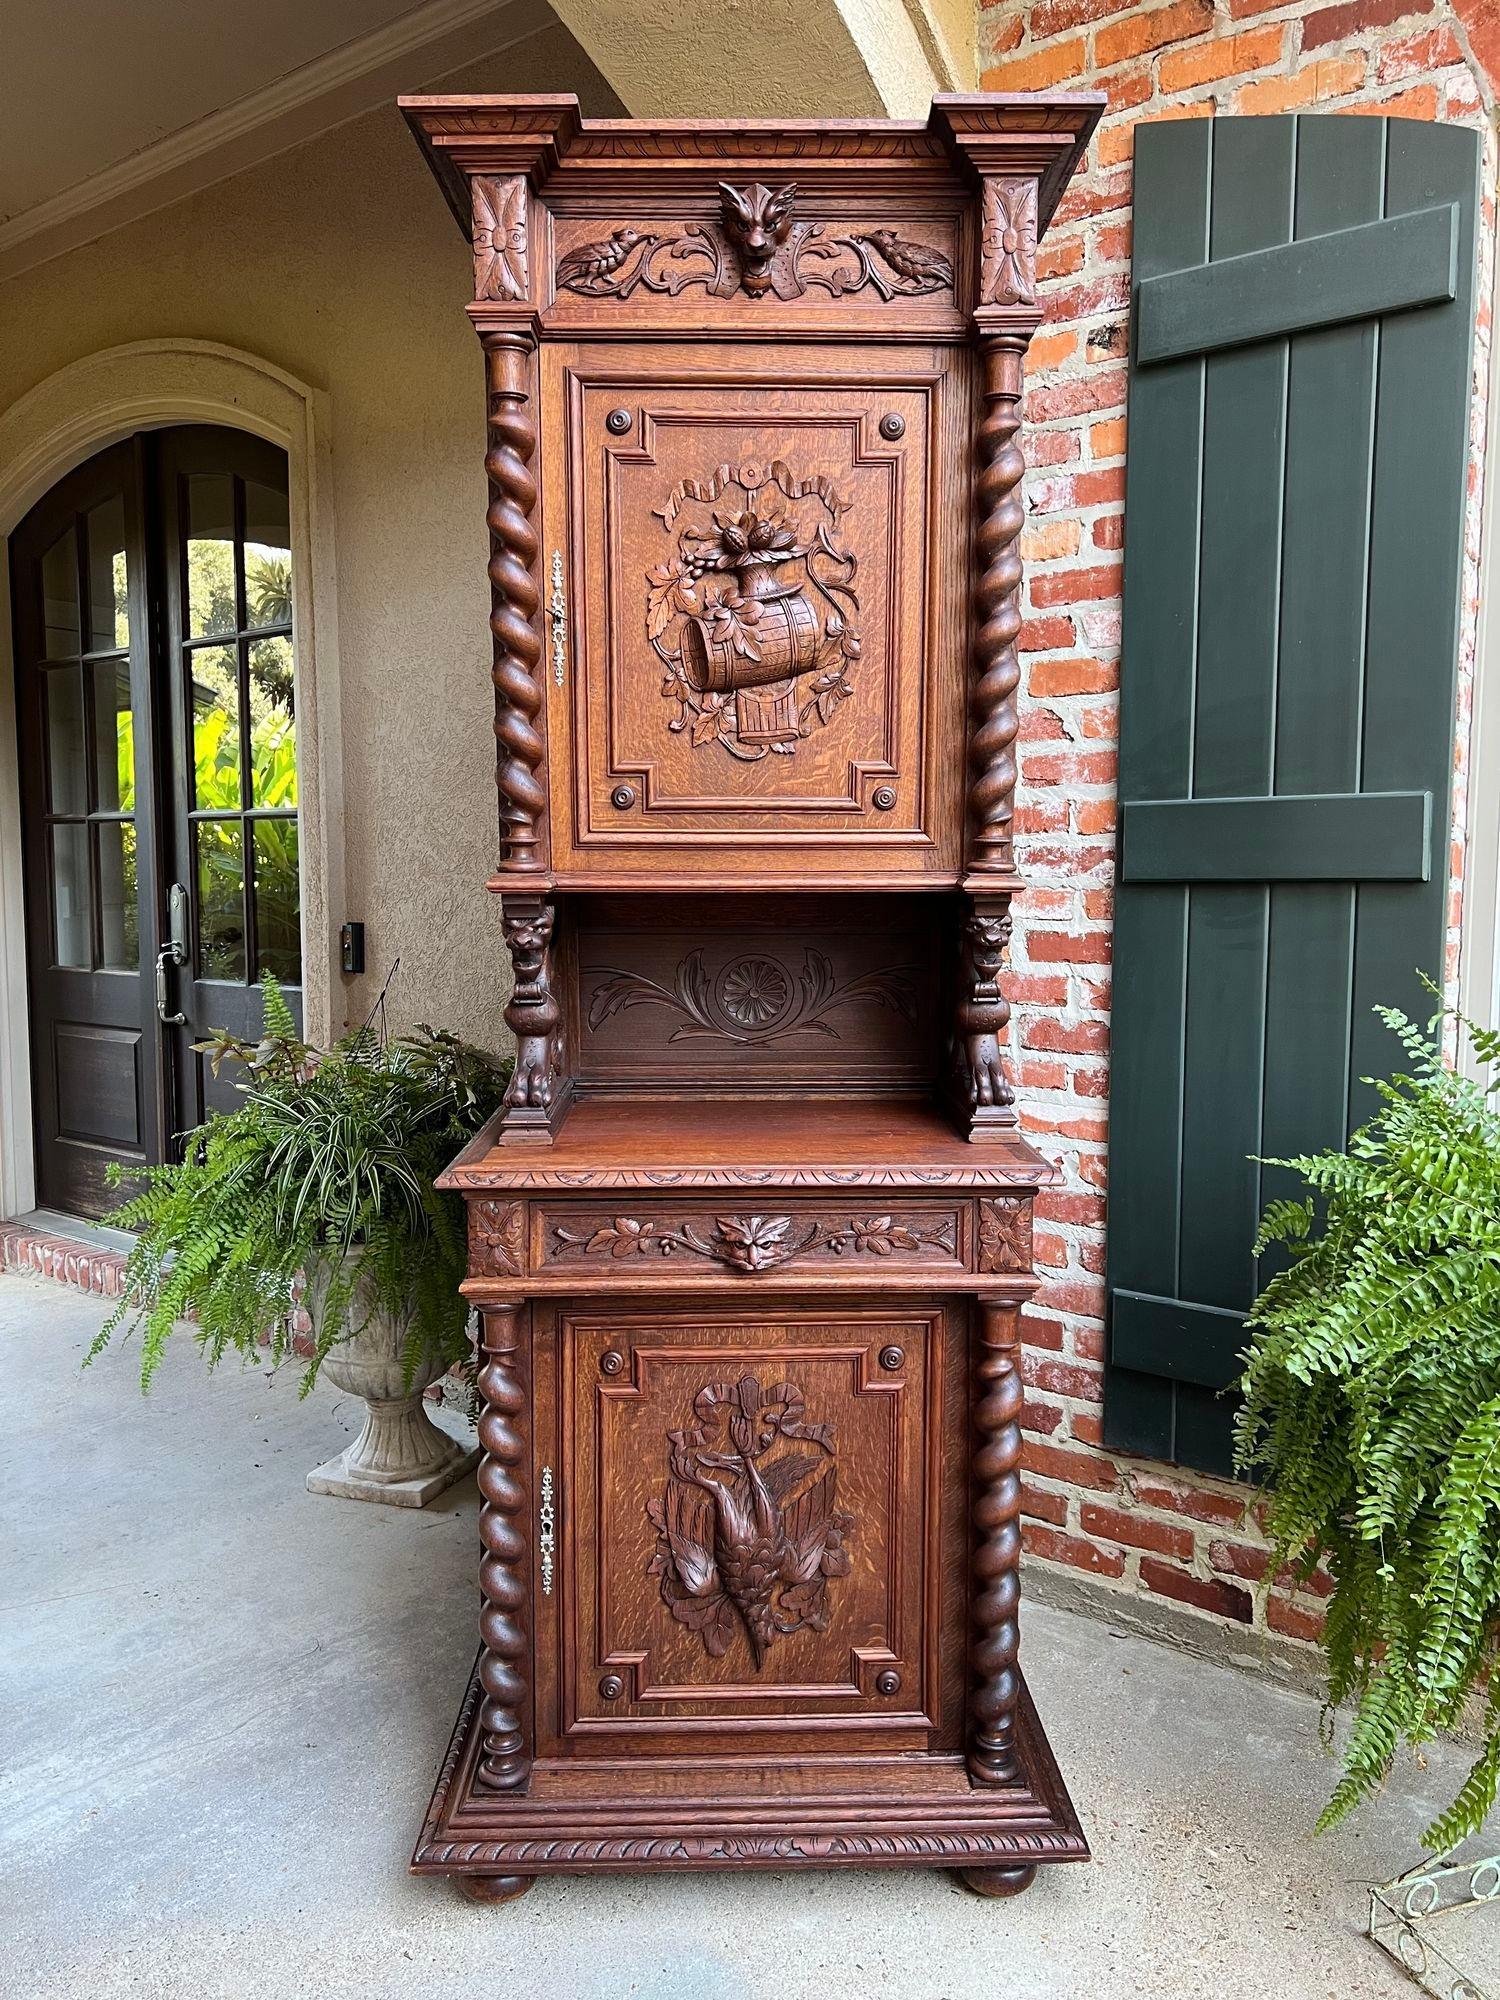 Antique French Hunt Cabinet Bookcase Barley Twist Black Forest Carved Baroque.
Direct from France, a superb, hand carved antique “Hunt Cabinet”/bookcase, very tall and majestic (over 7 ft. height), with lavish and highly sought after Black